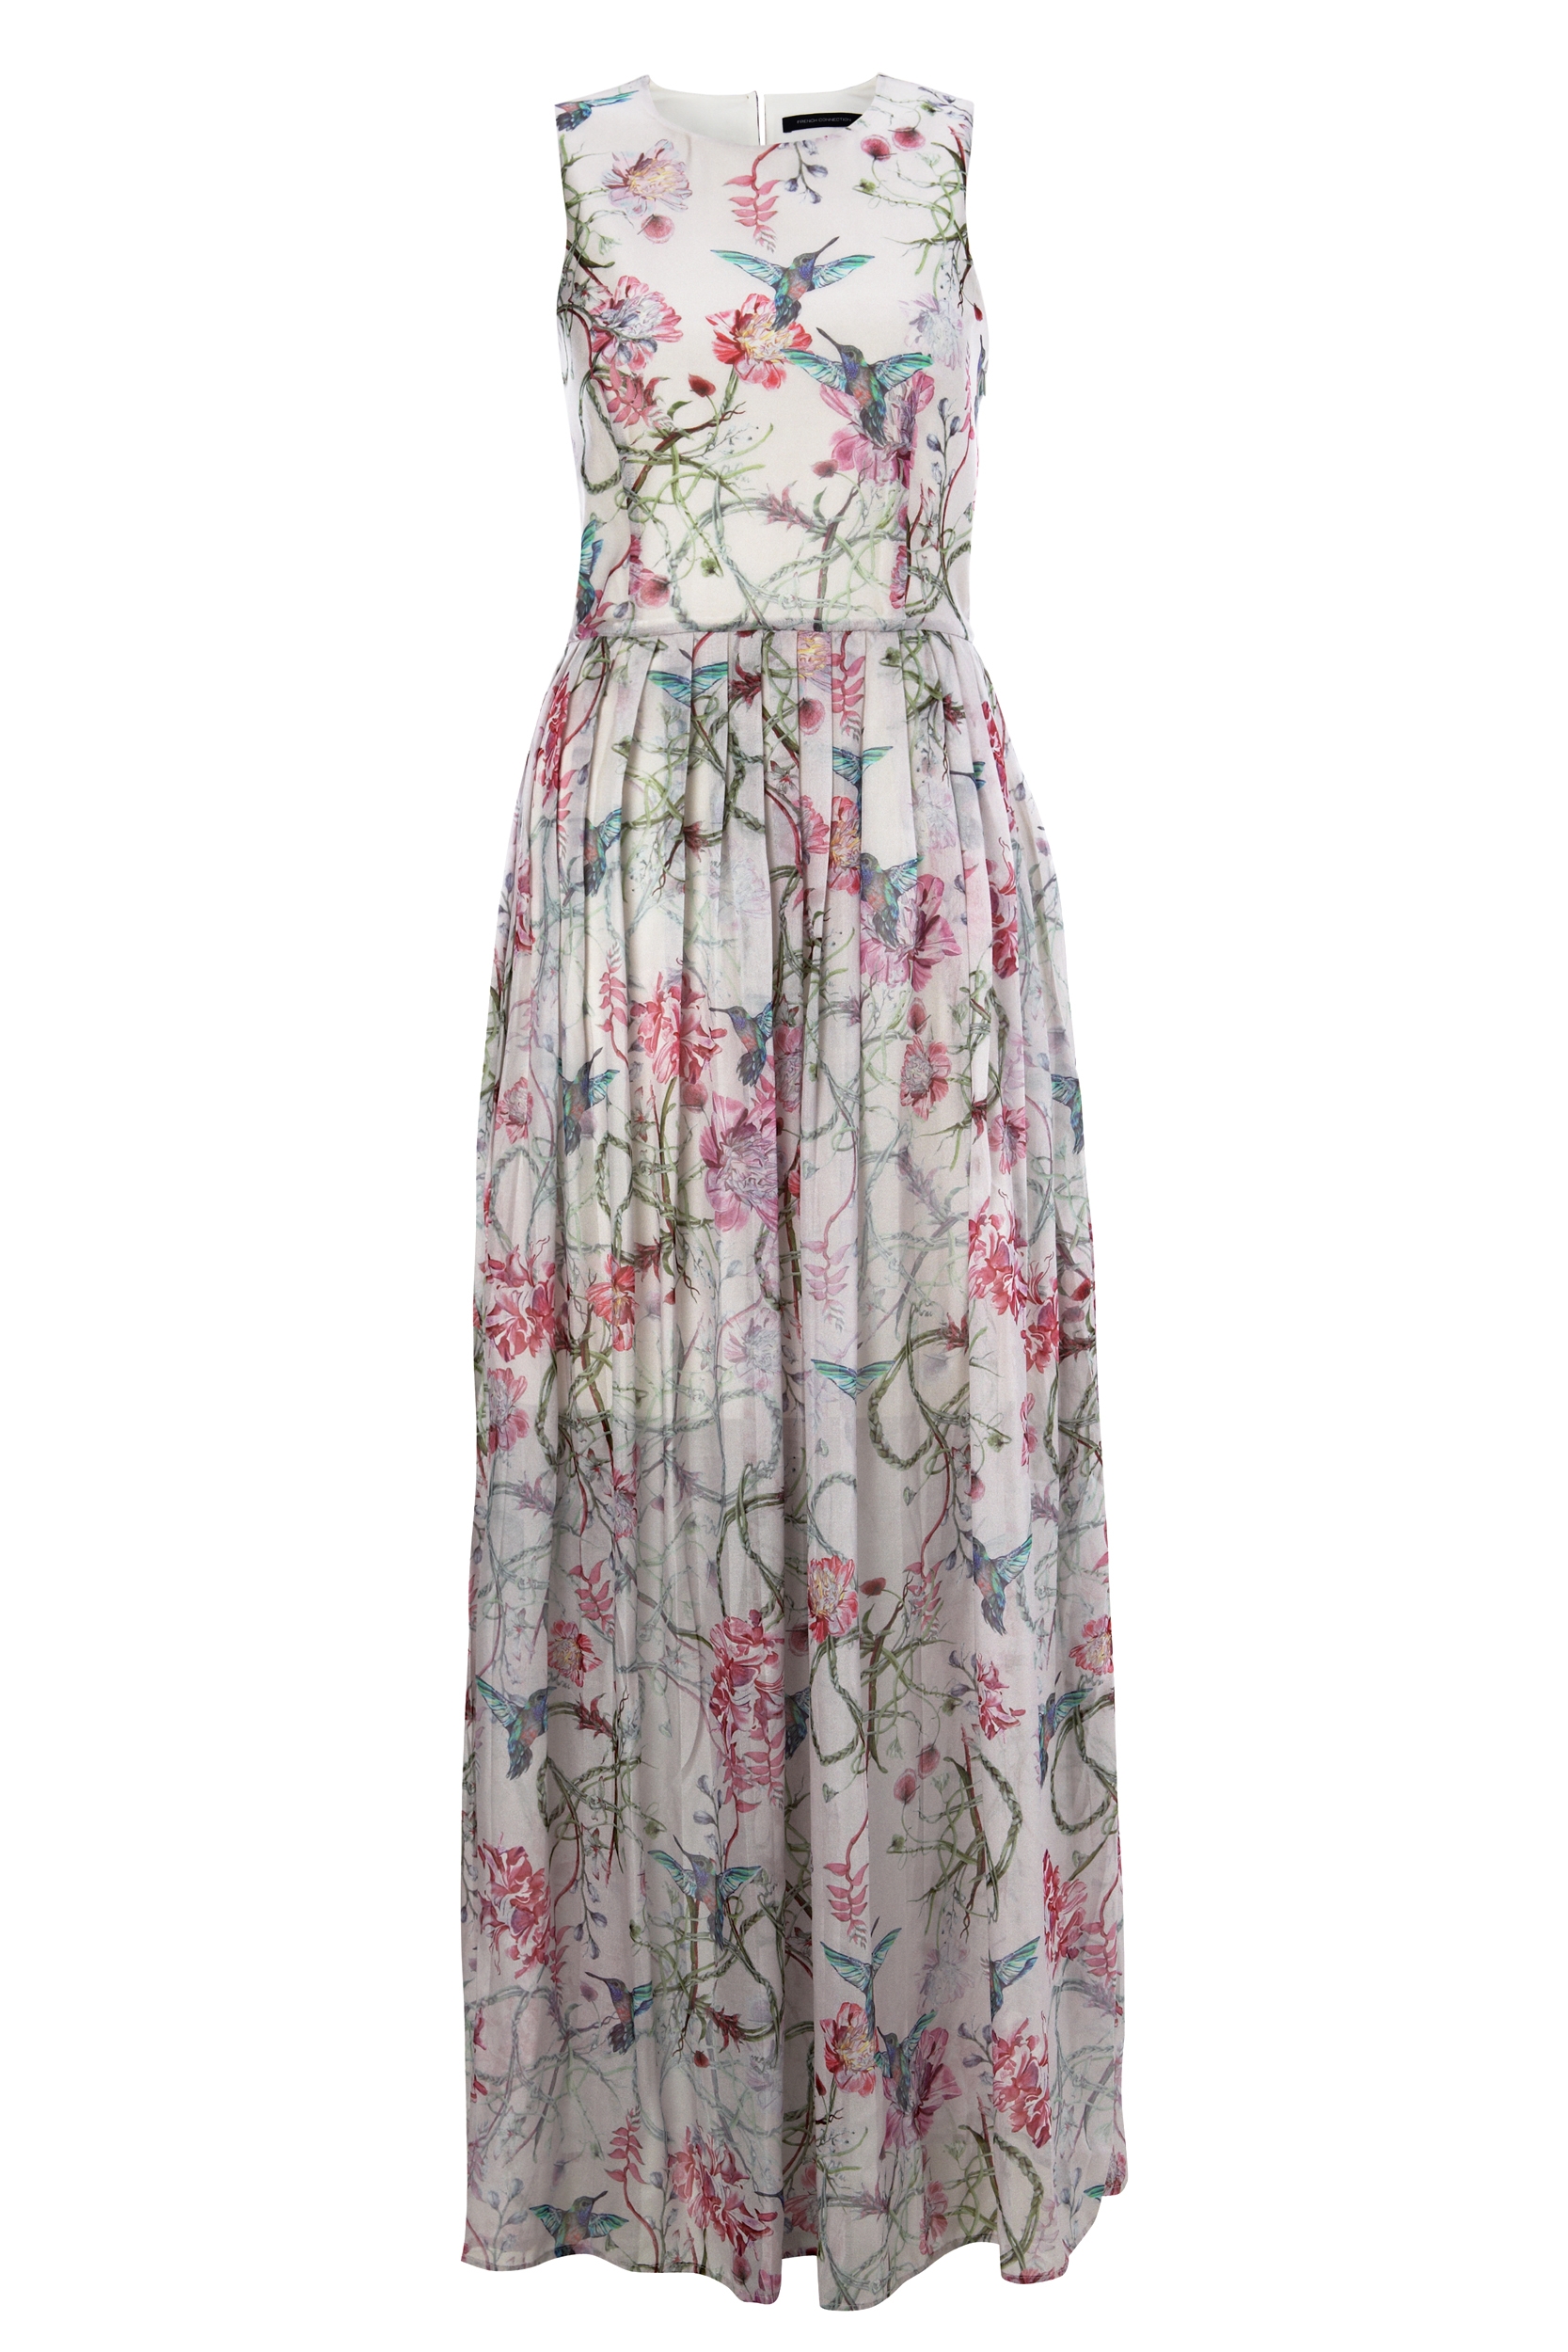 Lyst - French Connection Eden Of Zola Silk Maxi Dress in Pink